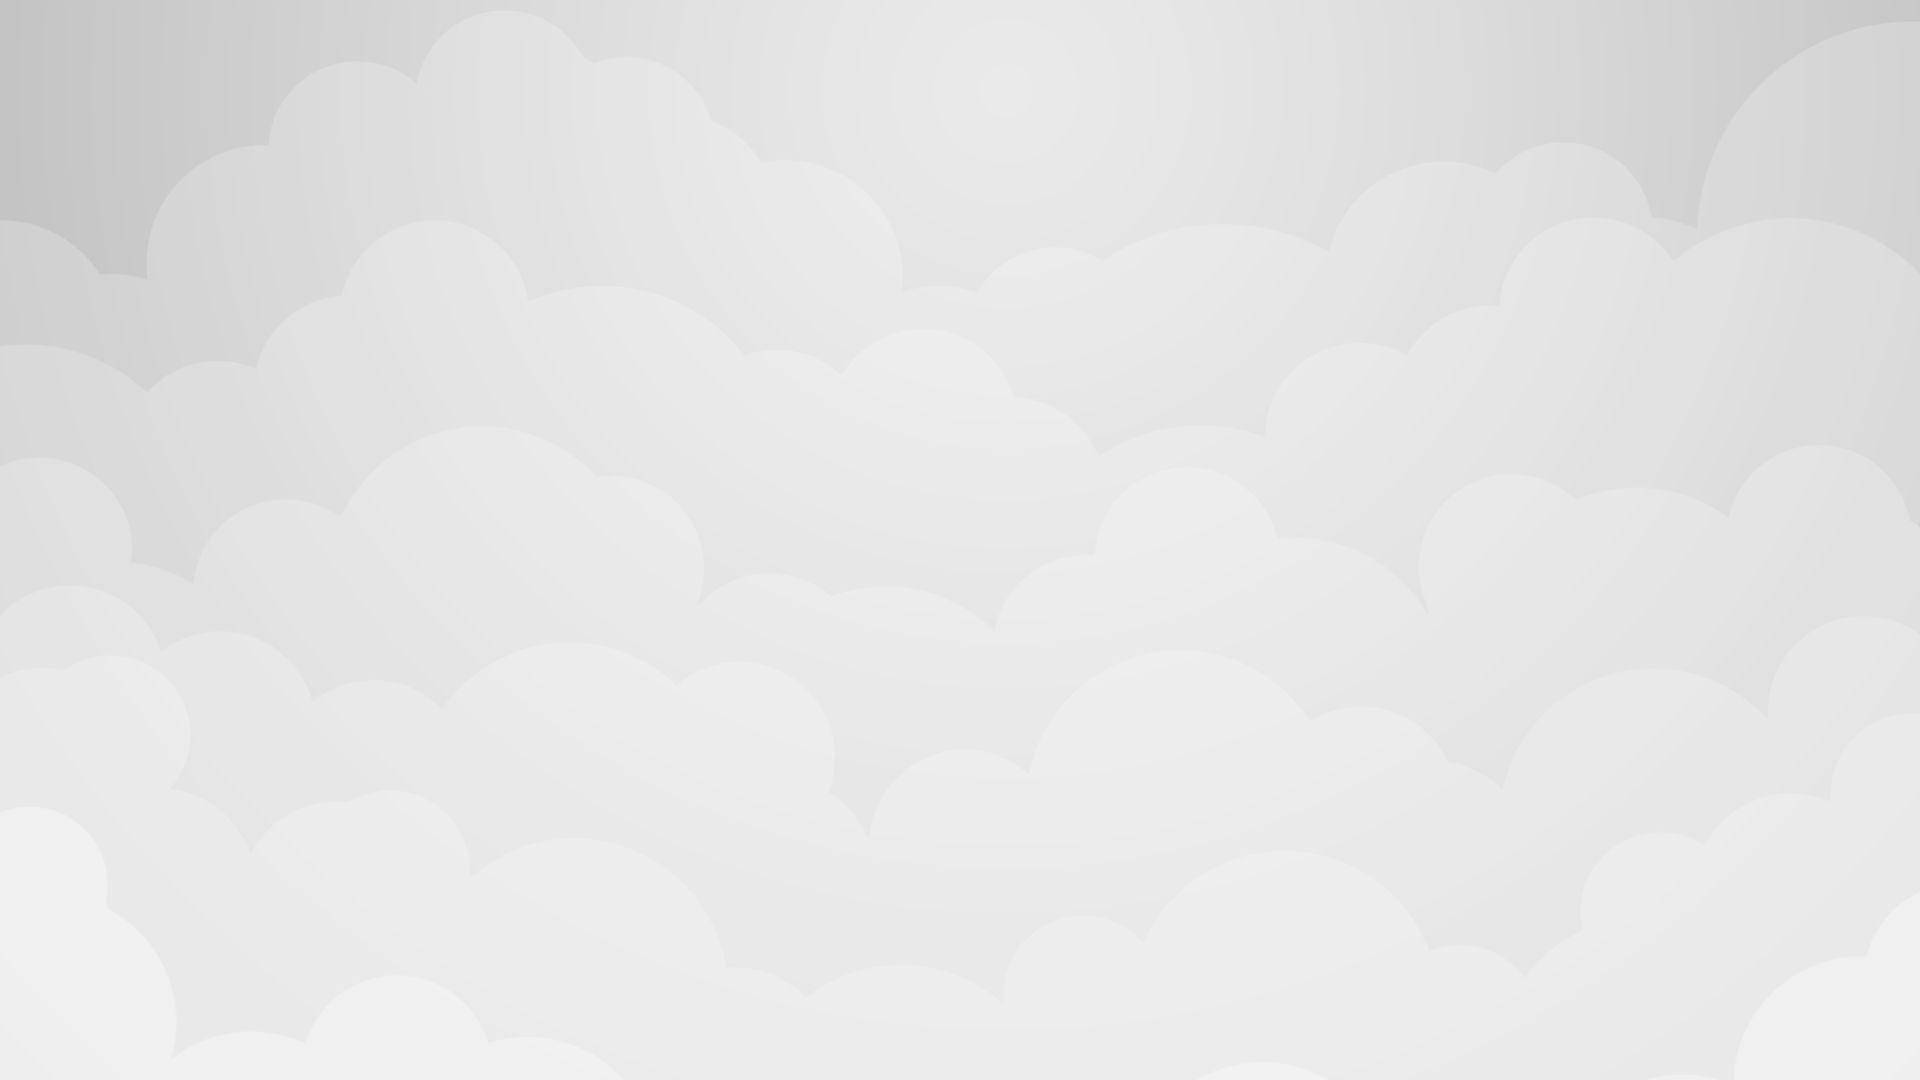 Layered Solid White Clouds Background